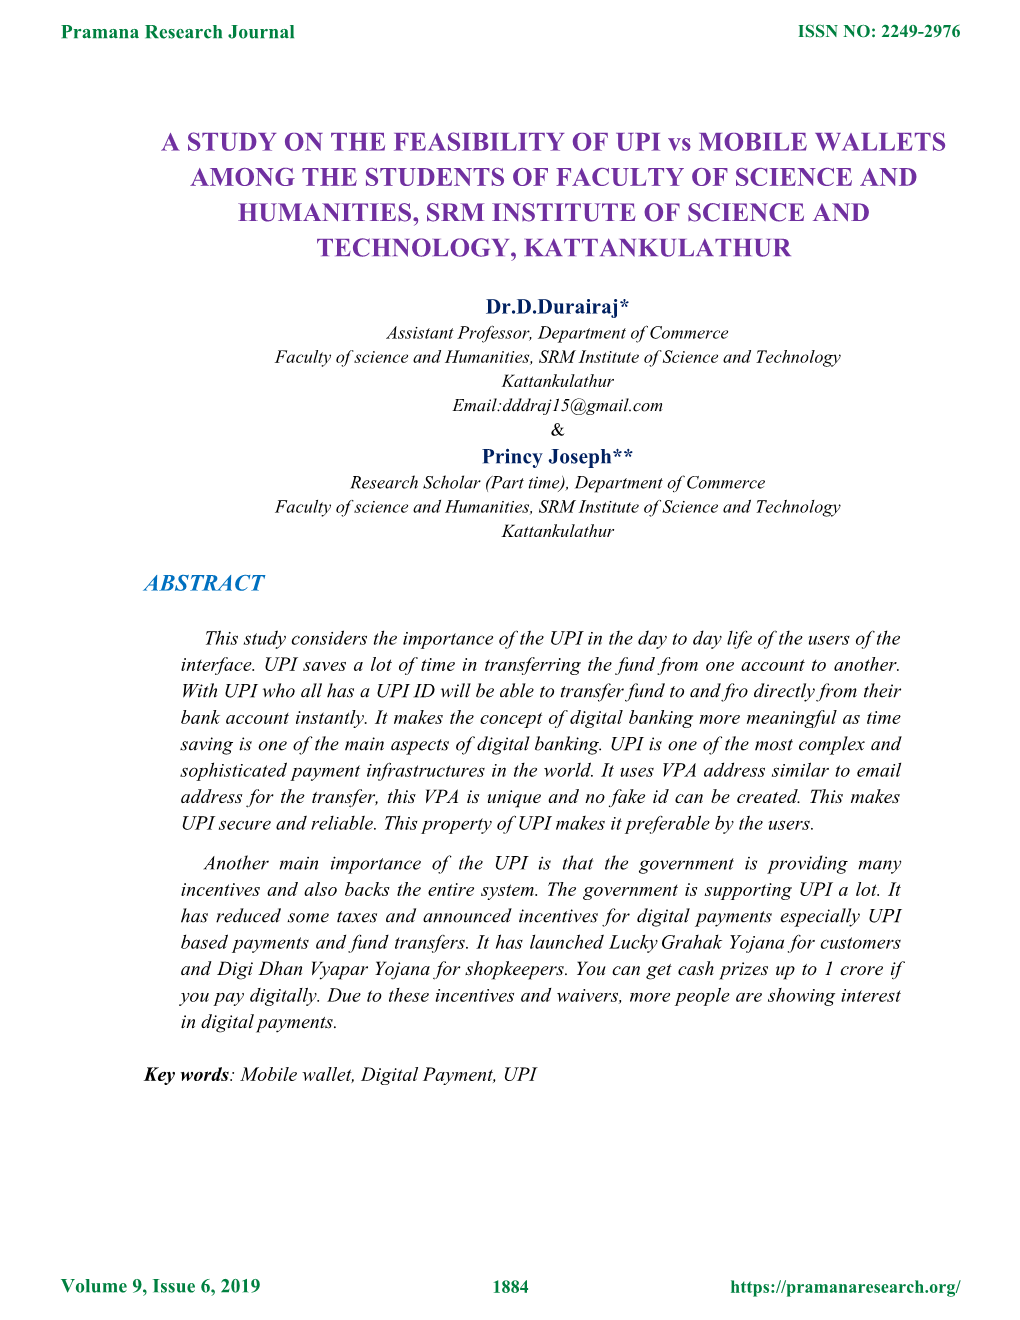 A STUDY on the FEASIBILITY of UPI Vs MOBILE WALLETS AMONG the STUDENTS of FACULTY of SCIENCE and HUMANITIES, SRM INSTITUTE of SCIENCE and TECHNOLOGY, KATTANKULATHUR